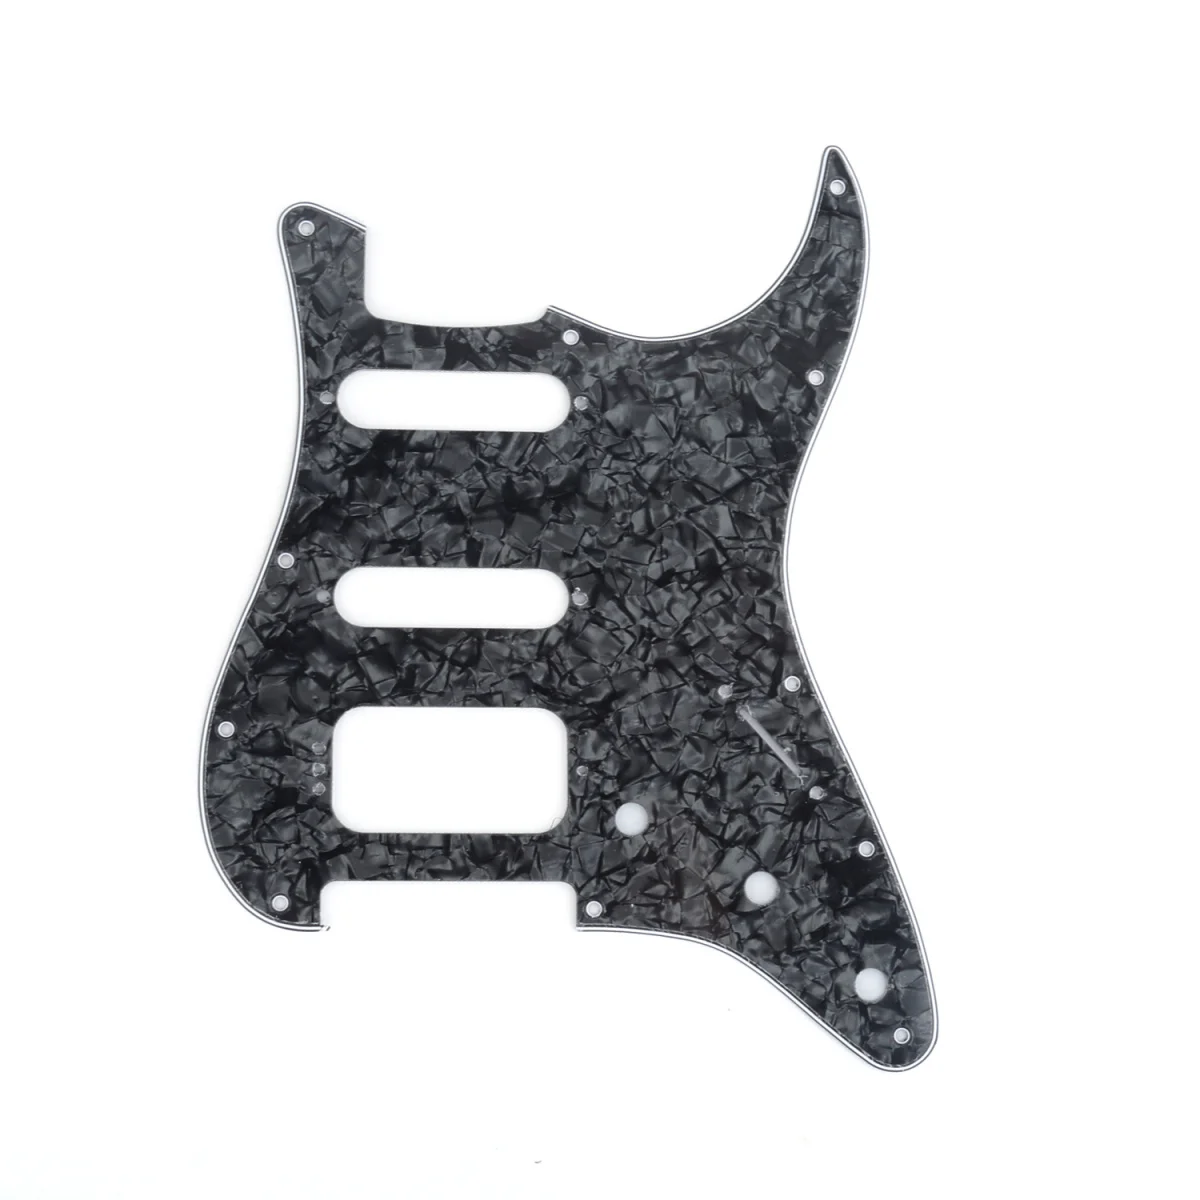 

Musiclily Pro 11-Hole Round Corner HSS Guitar Strat Pickguard for USA/Mexican Strat 4-screw Humbucking Pickup, 4Ply Black Pearl